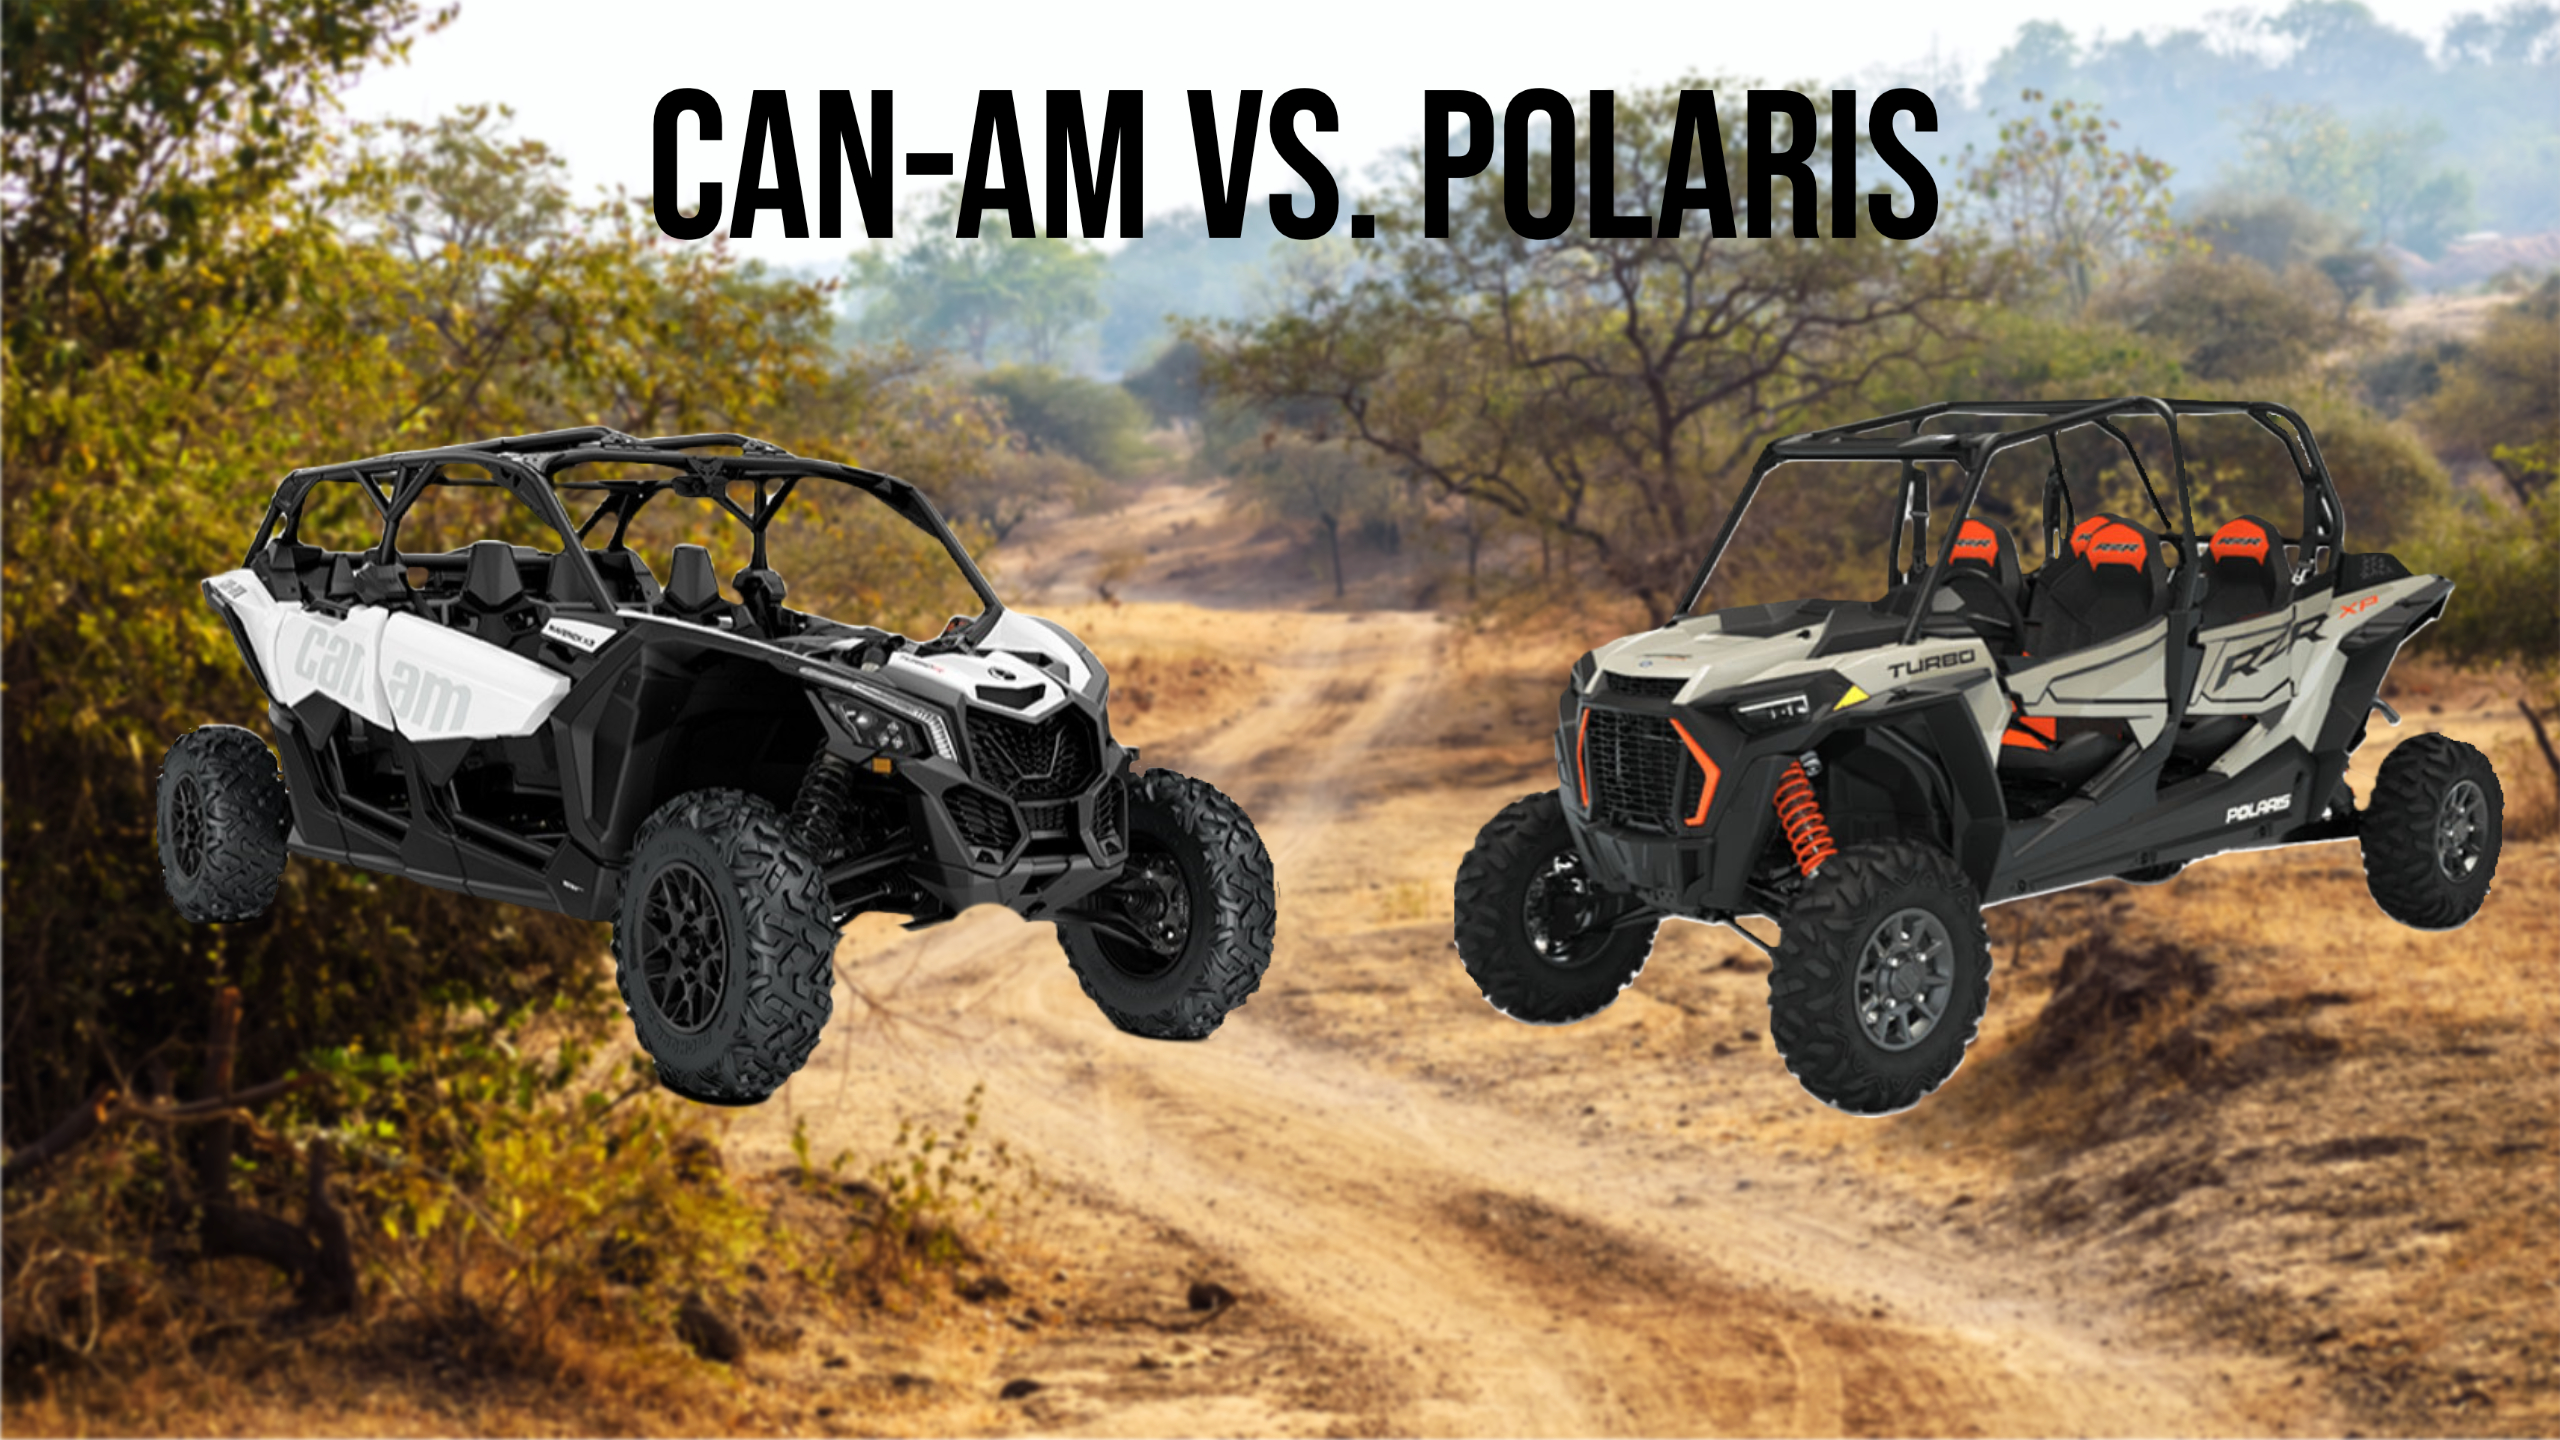 Can-am vs Polaris UTVs face off on a sandy trail surrounded by desert landscape.